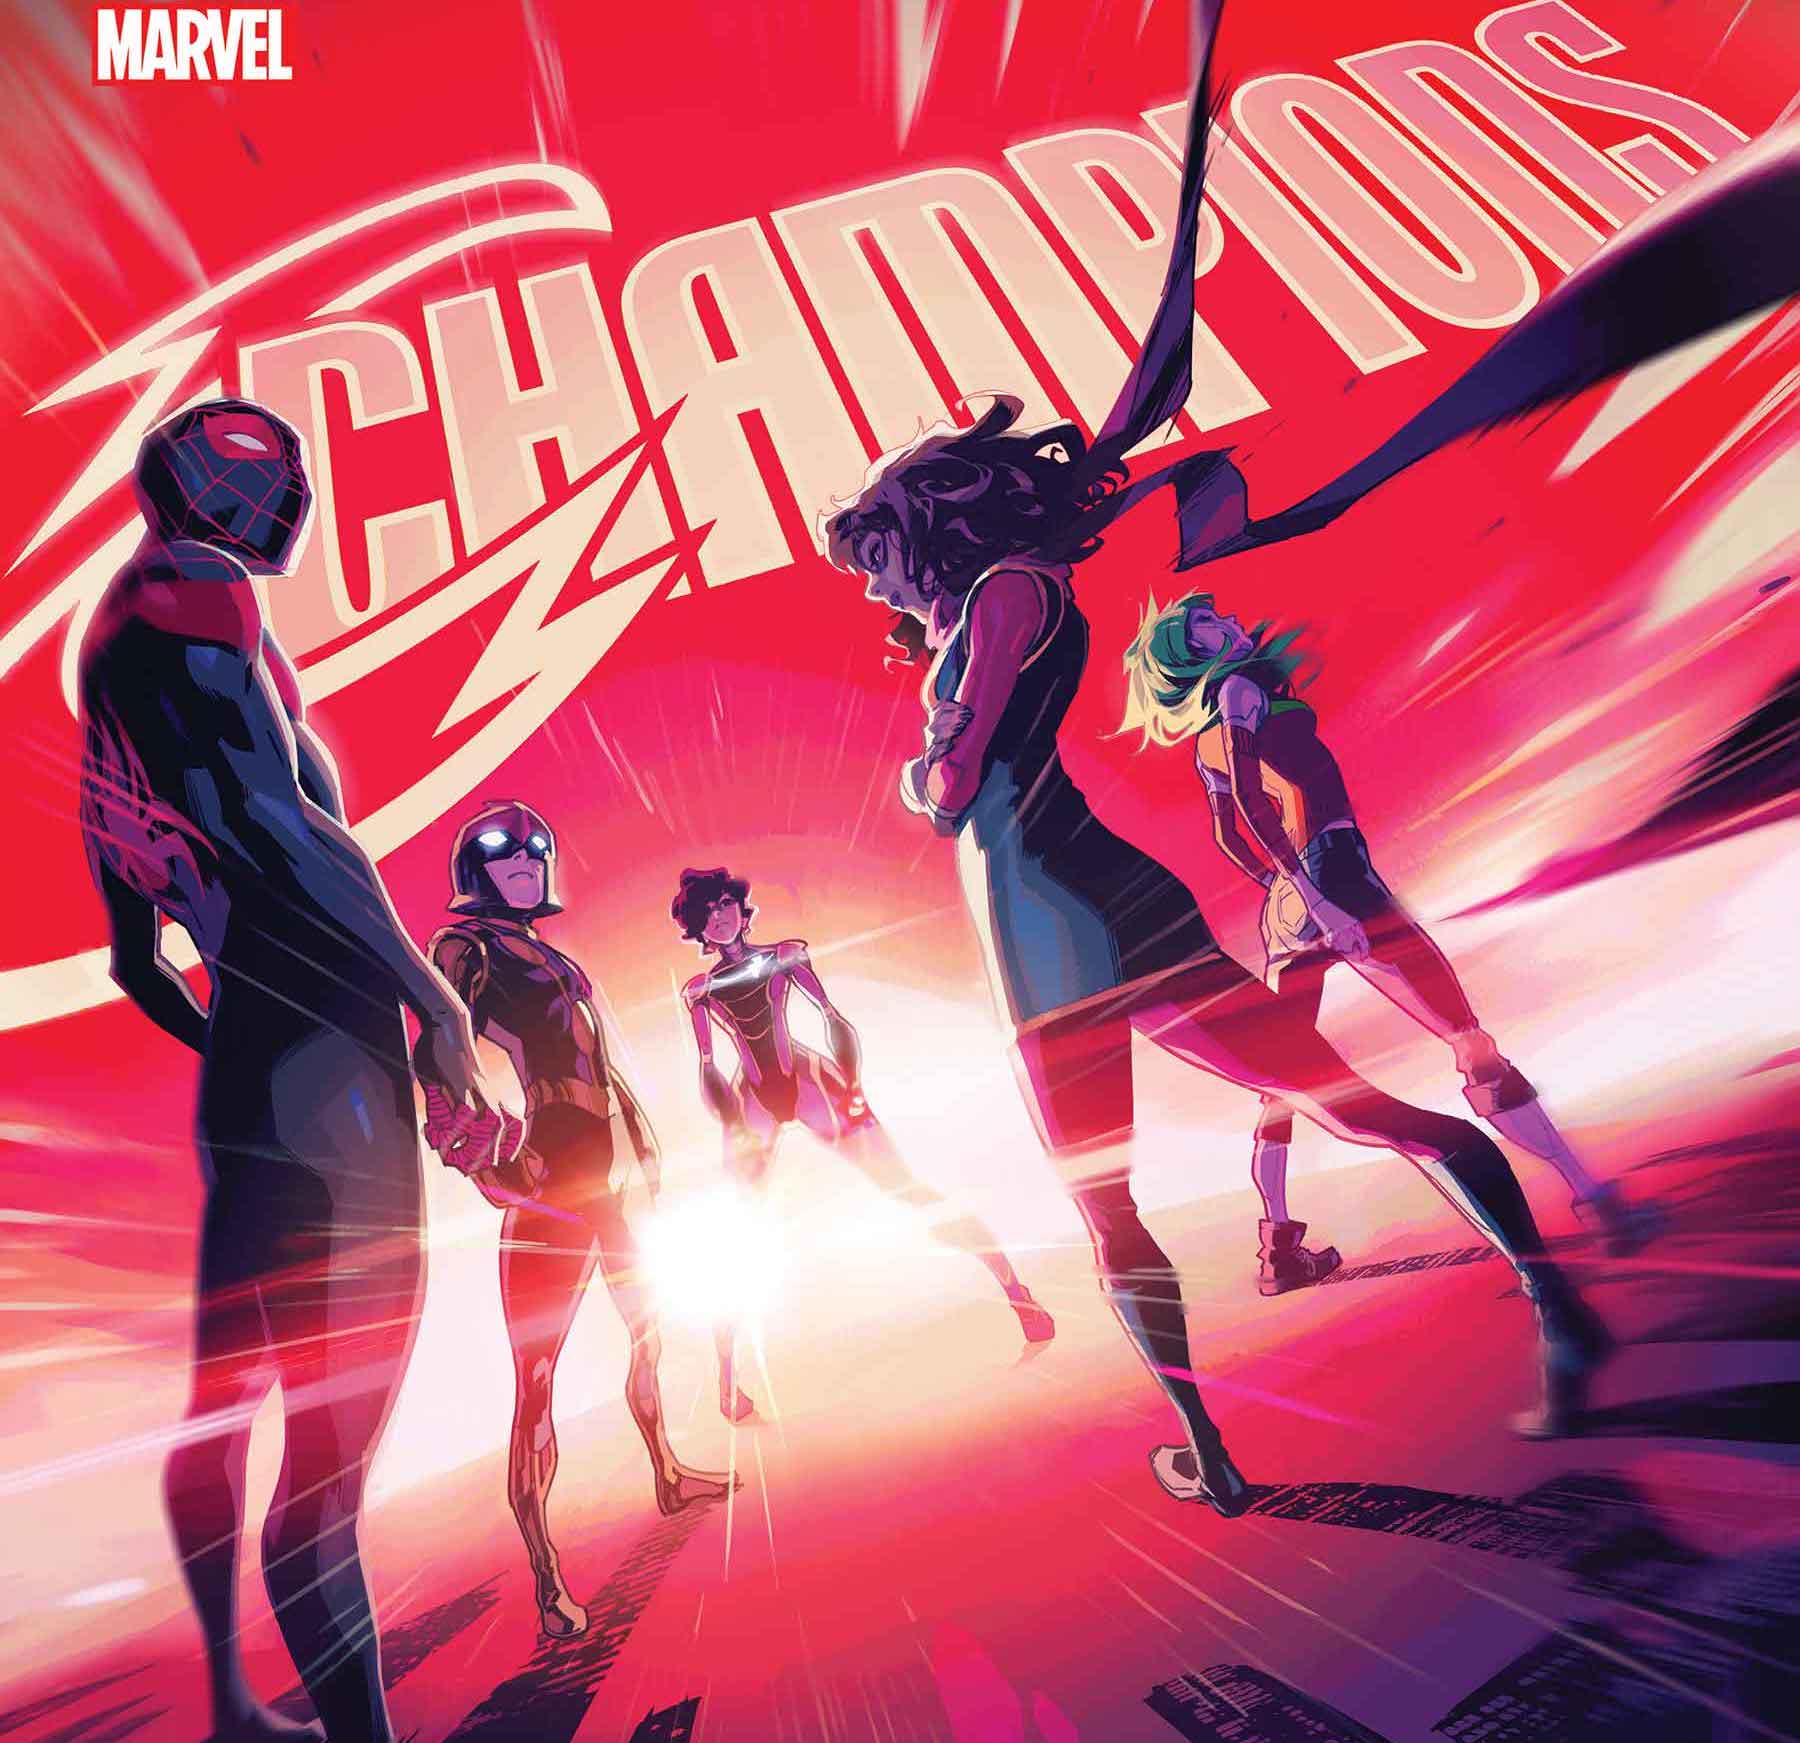 Marvel's 'Champions' to change creative team and the world in April 2021